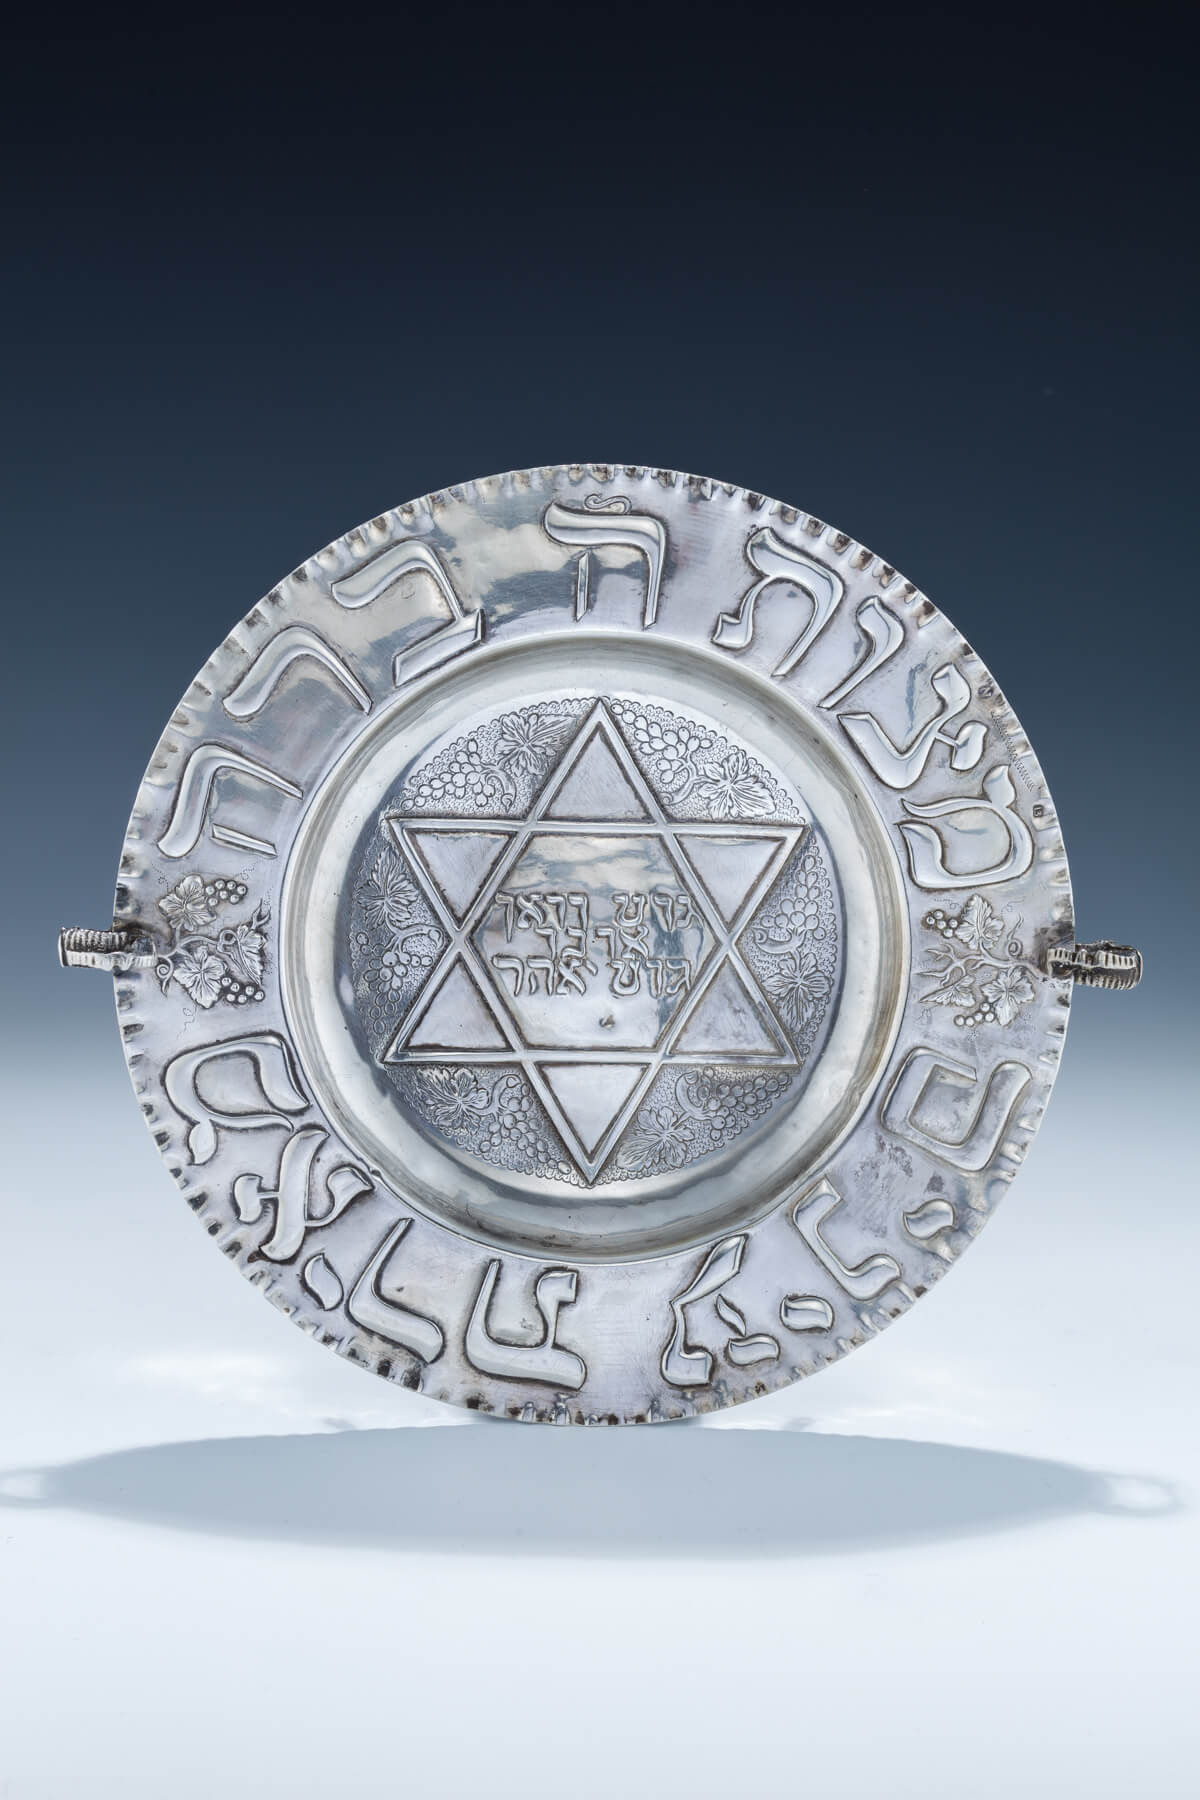 83. A Silver Havdallah Plate